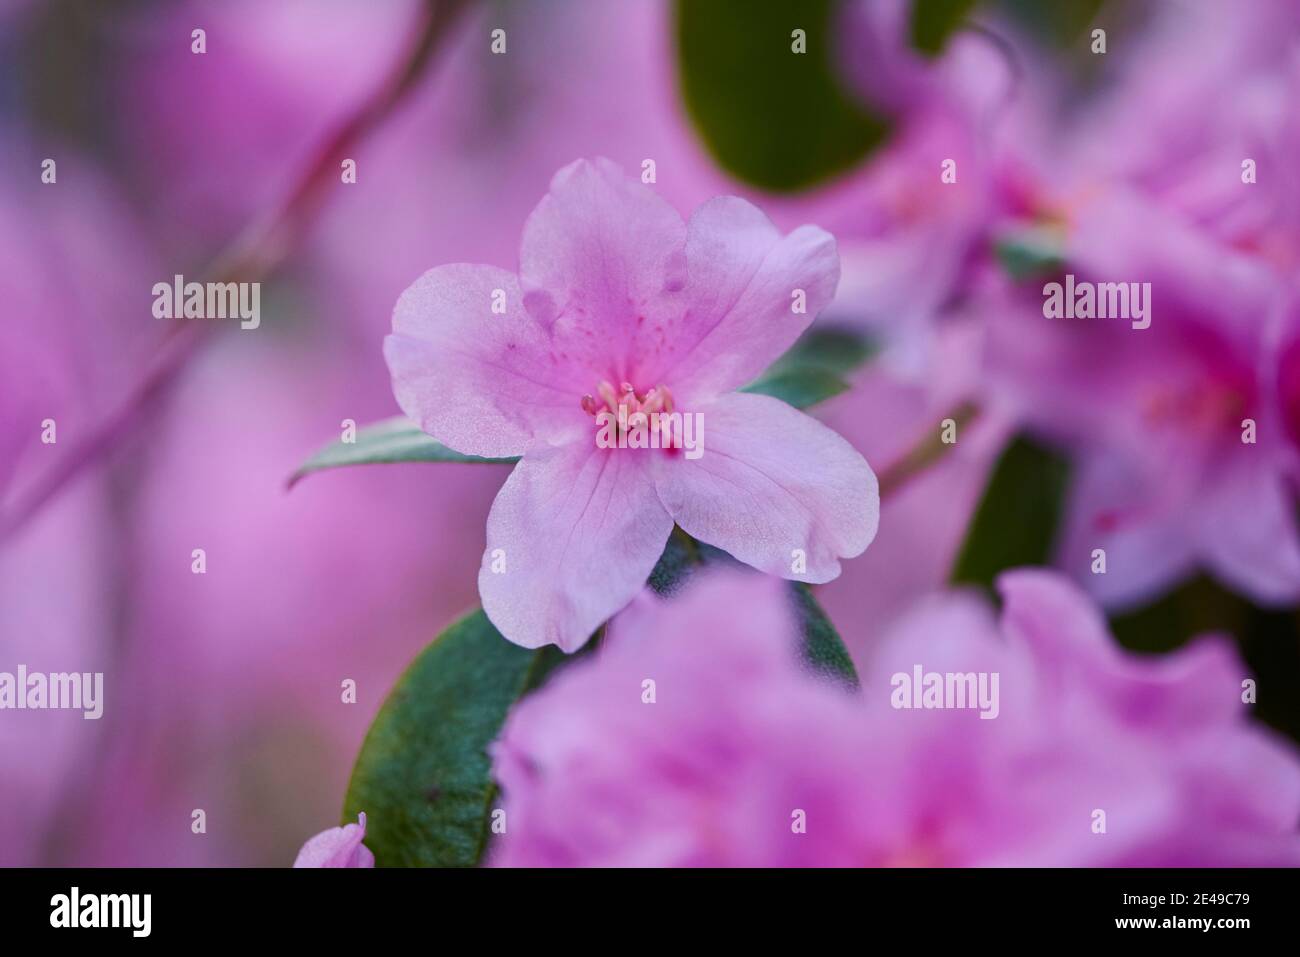 Pink-colored rhododendron flowers (Rhododendro), Bavaria, Germany Stock Photo